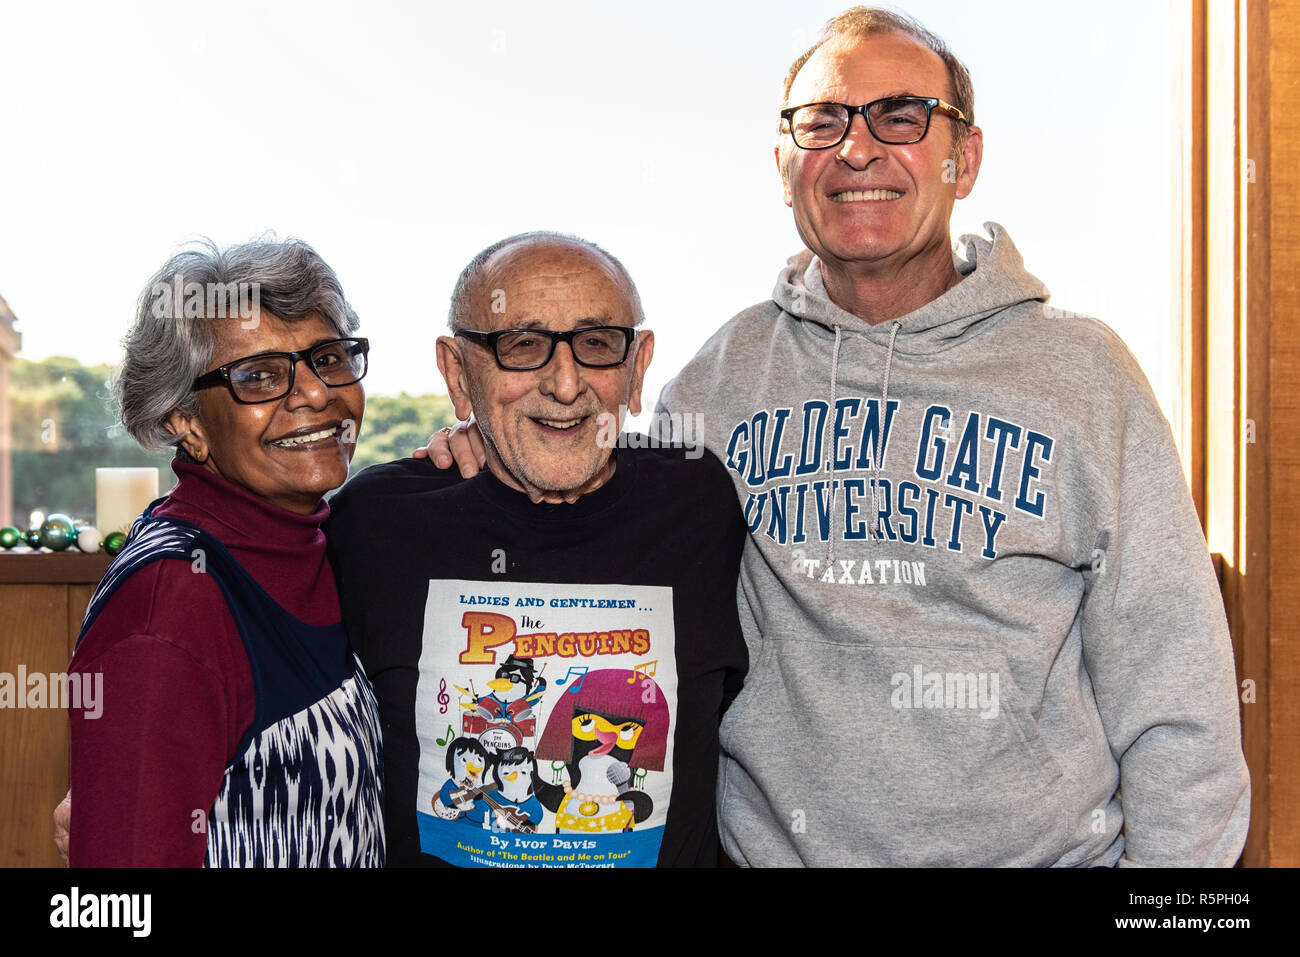 California, USA. 1st Dec 2018. Author, Ivor Davis with Janet and Mark Goldenson at book signing at Pierpont Racquet Club in Ventura, California, USA on December 1, 2018. Credit: Jon Osumi/Alamy Live News Stock Photo